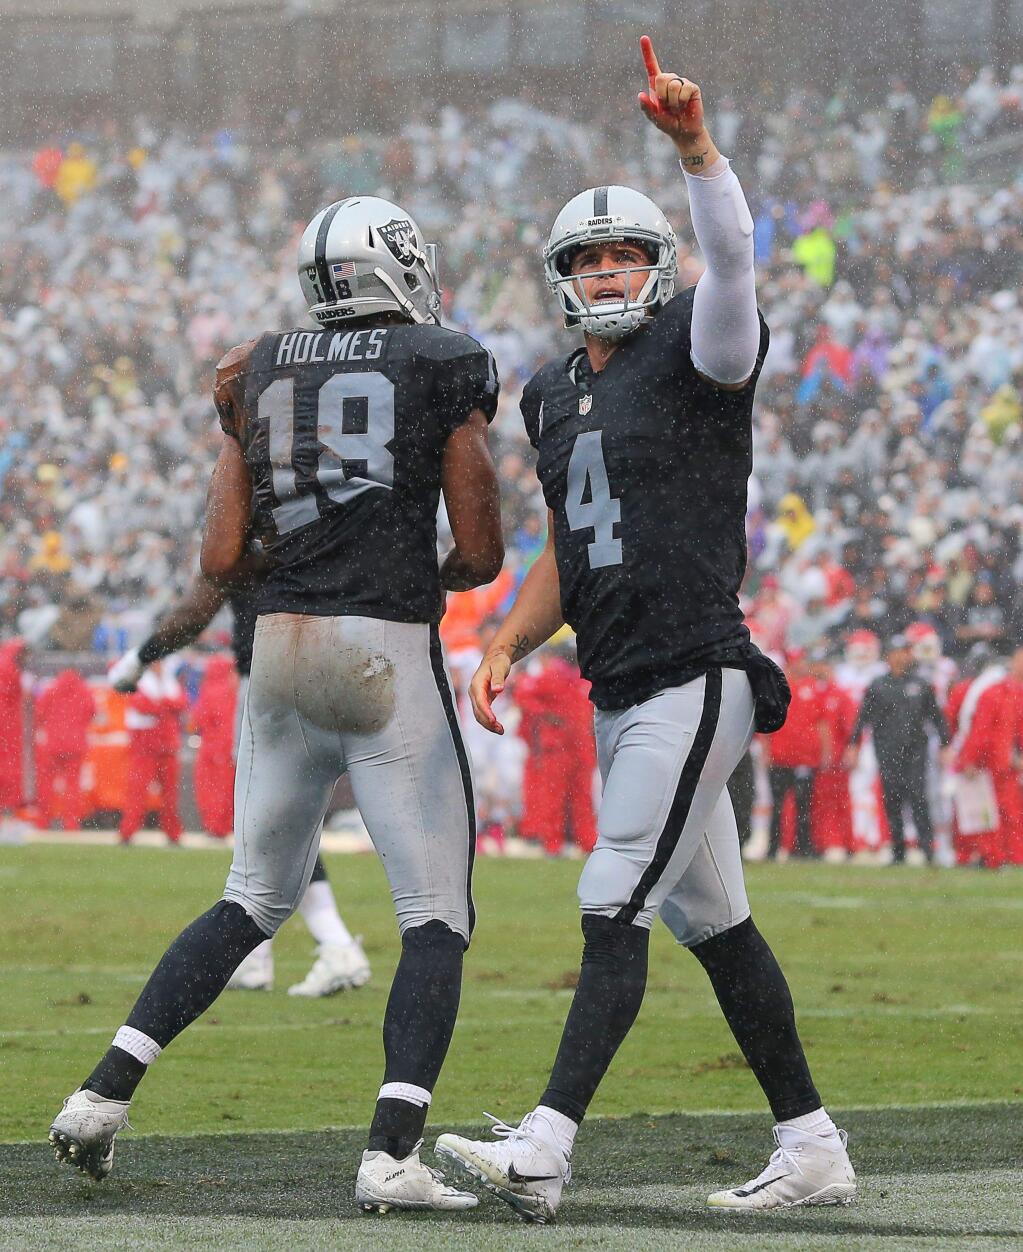 Oakland Raiders quarterback Derek Carr celebrates his first quarter touchdown pass to wide receiver Andre Holmes, during their game against the Kansas City Chiefs in Oakland on Sunday, October 16, 2016. The Raiders lost to the Chiefs 26-10. (Christopher Chung/ The Press Democrat)